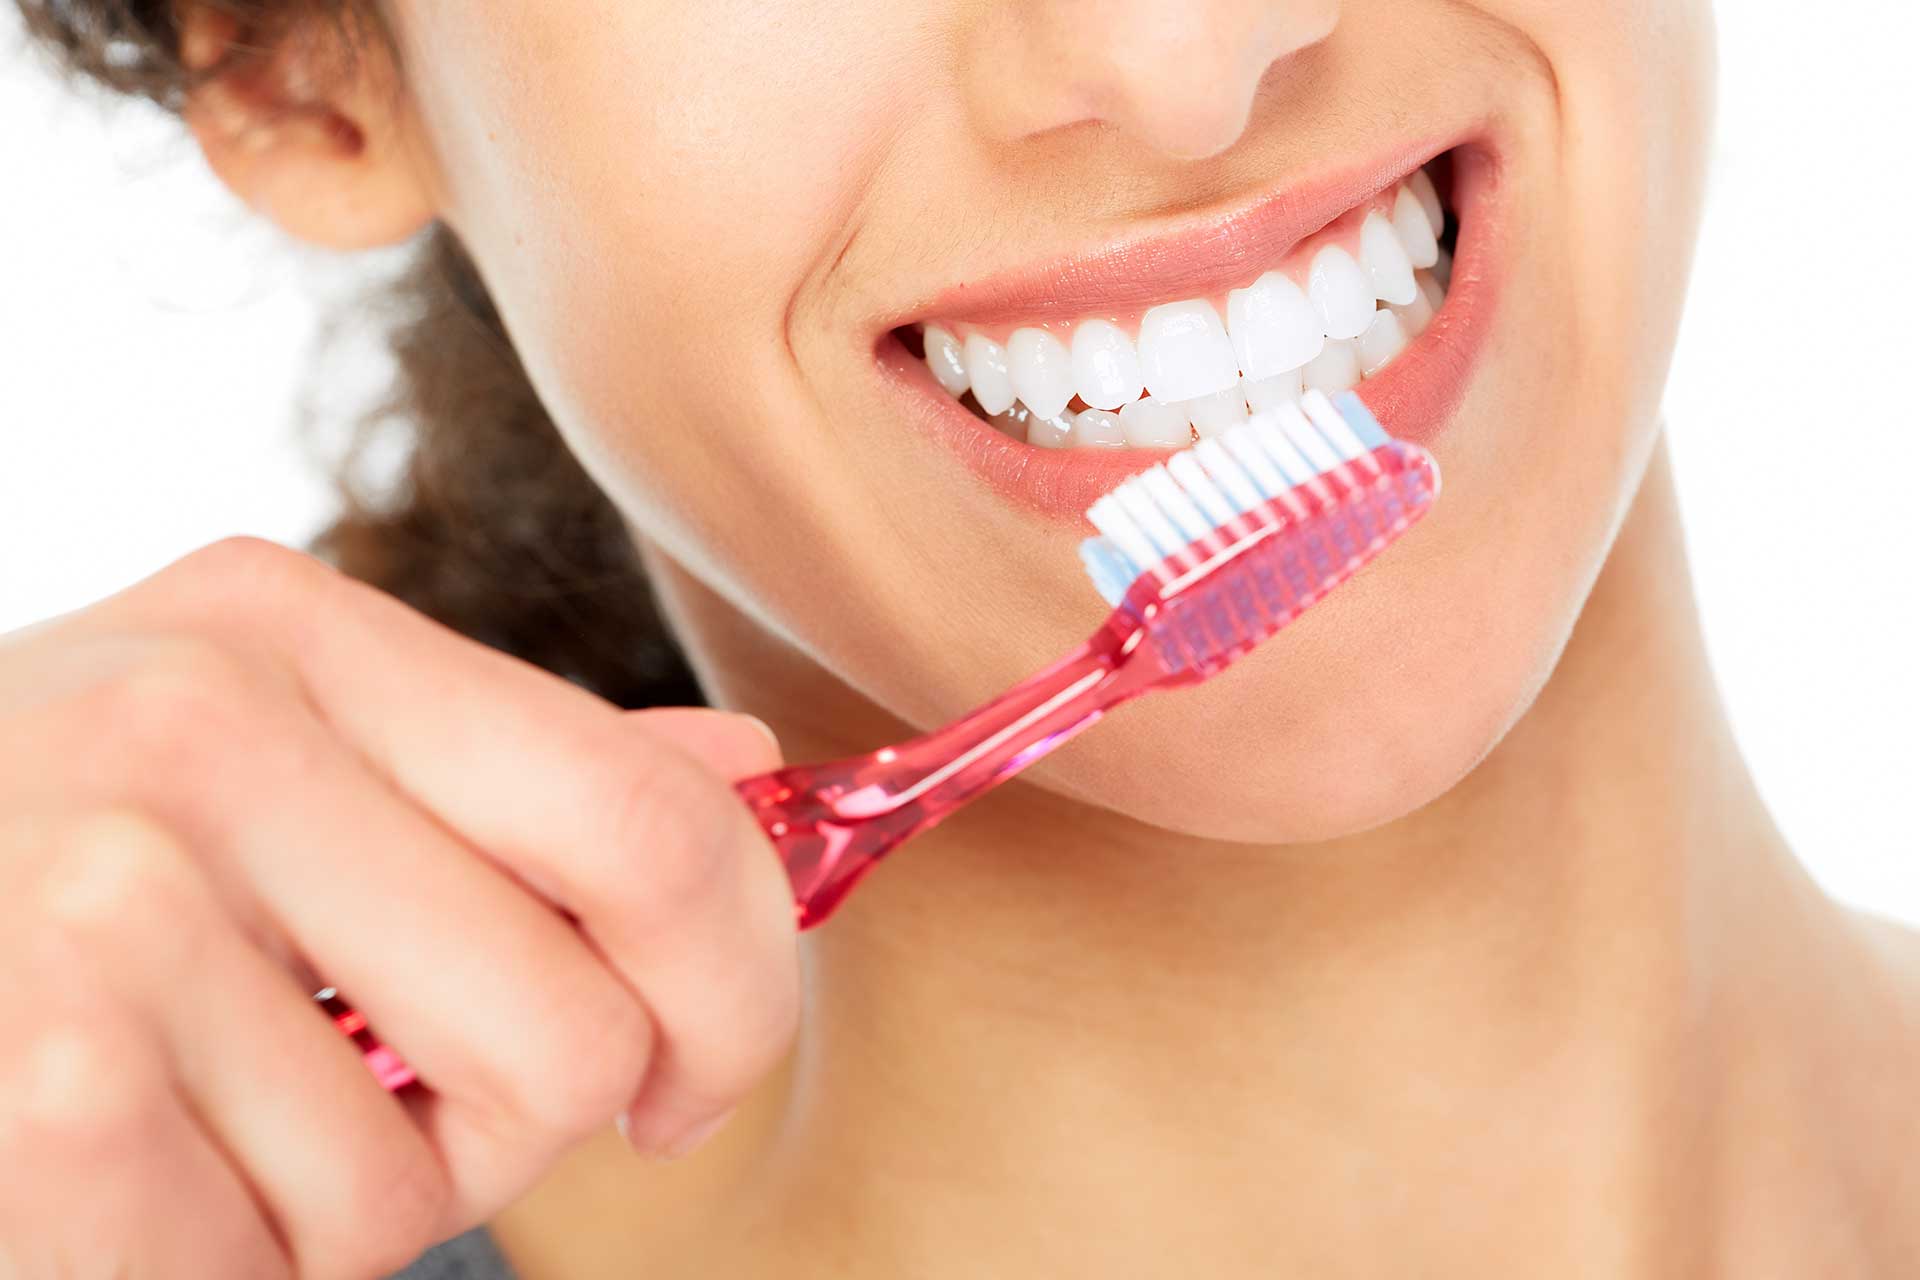 The Golden Rules of Maintaining Oral Health